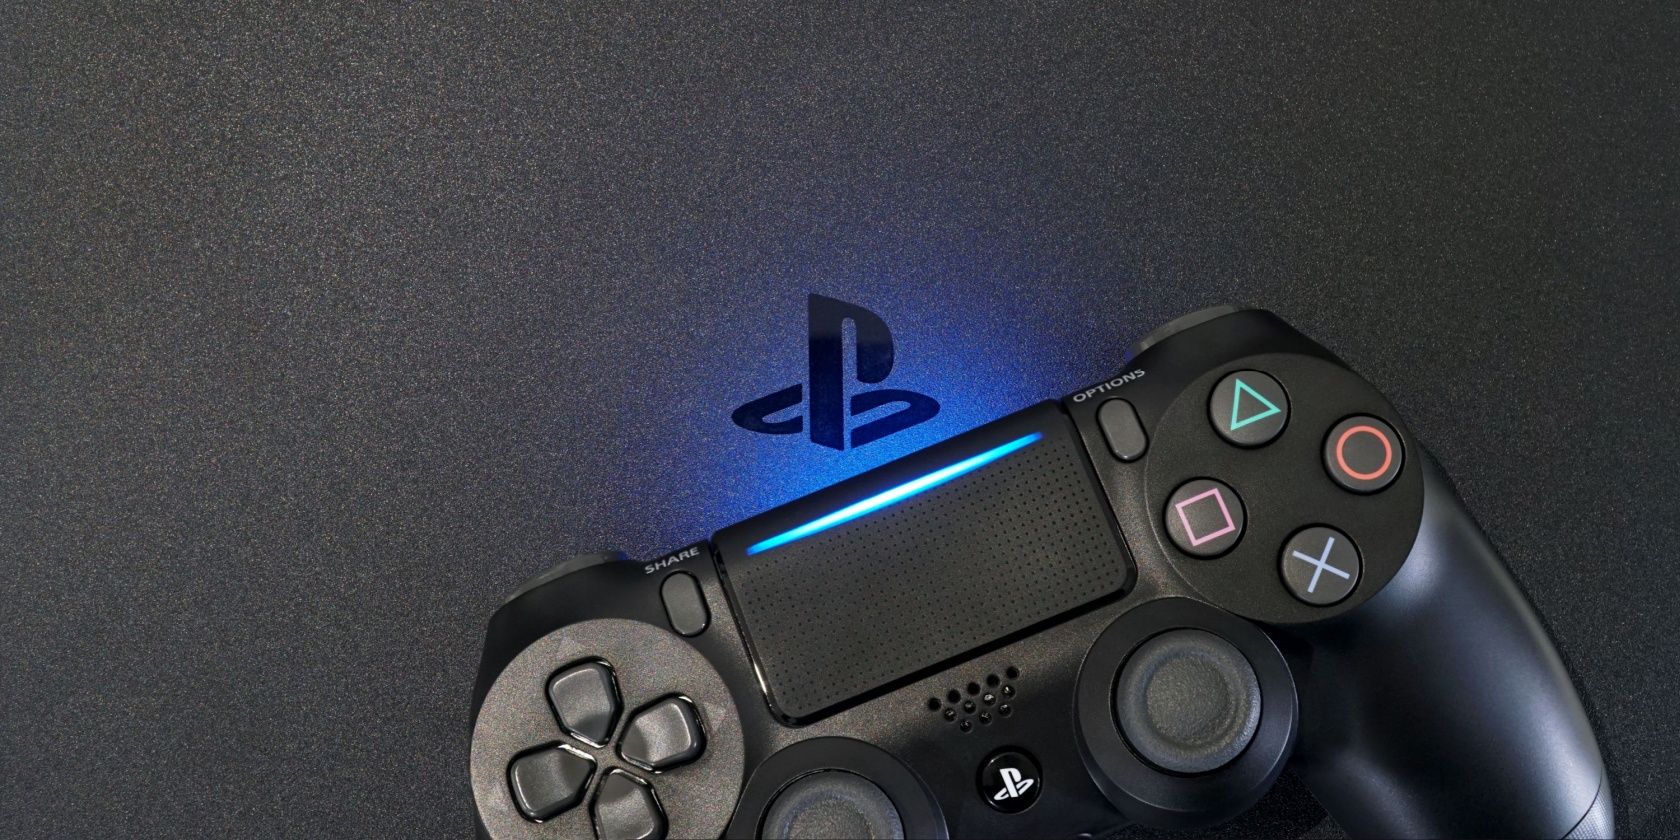 PS4 Controller on PS4 Console